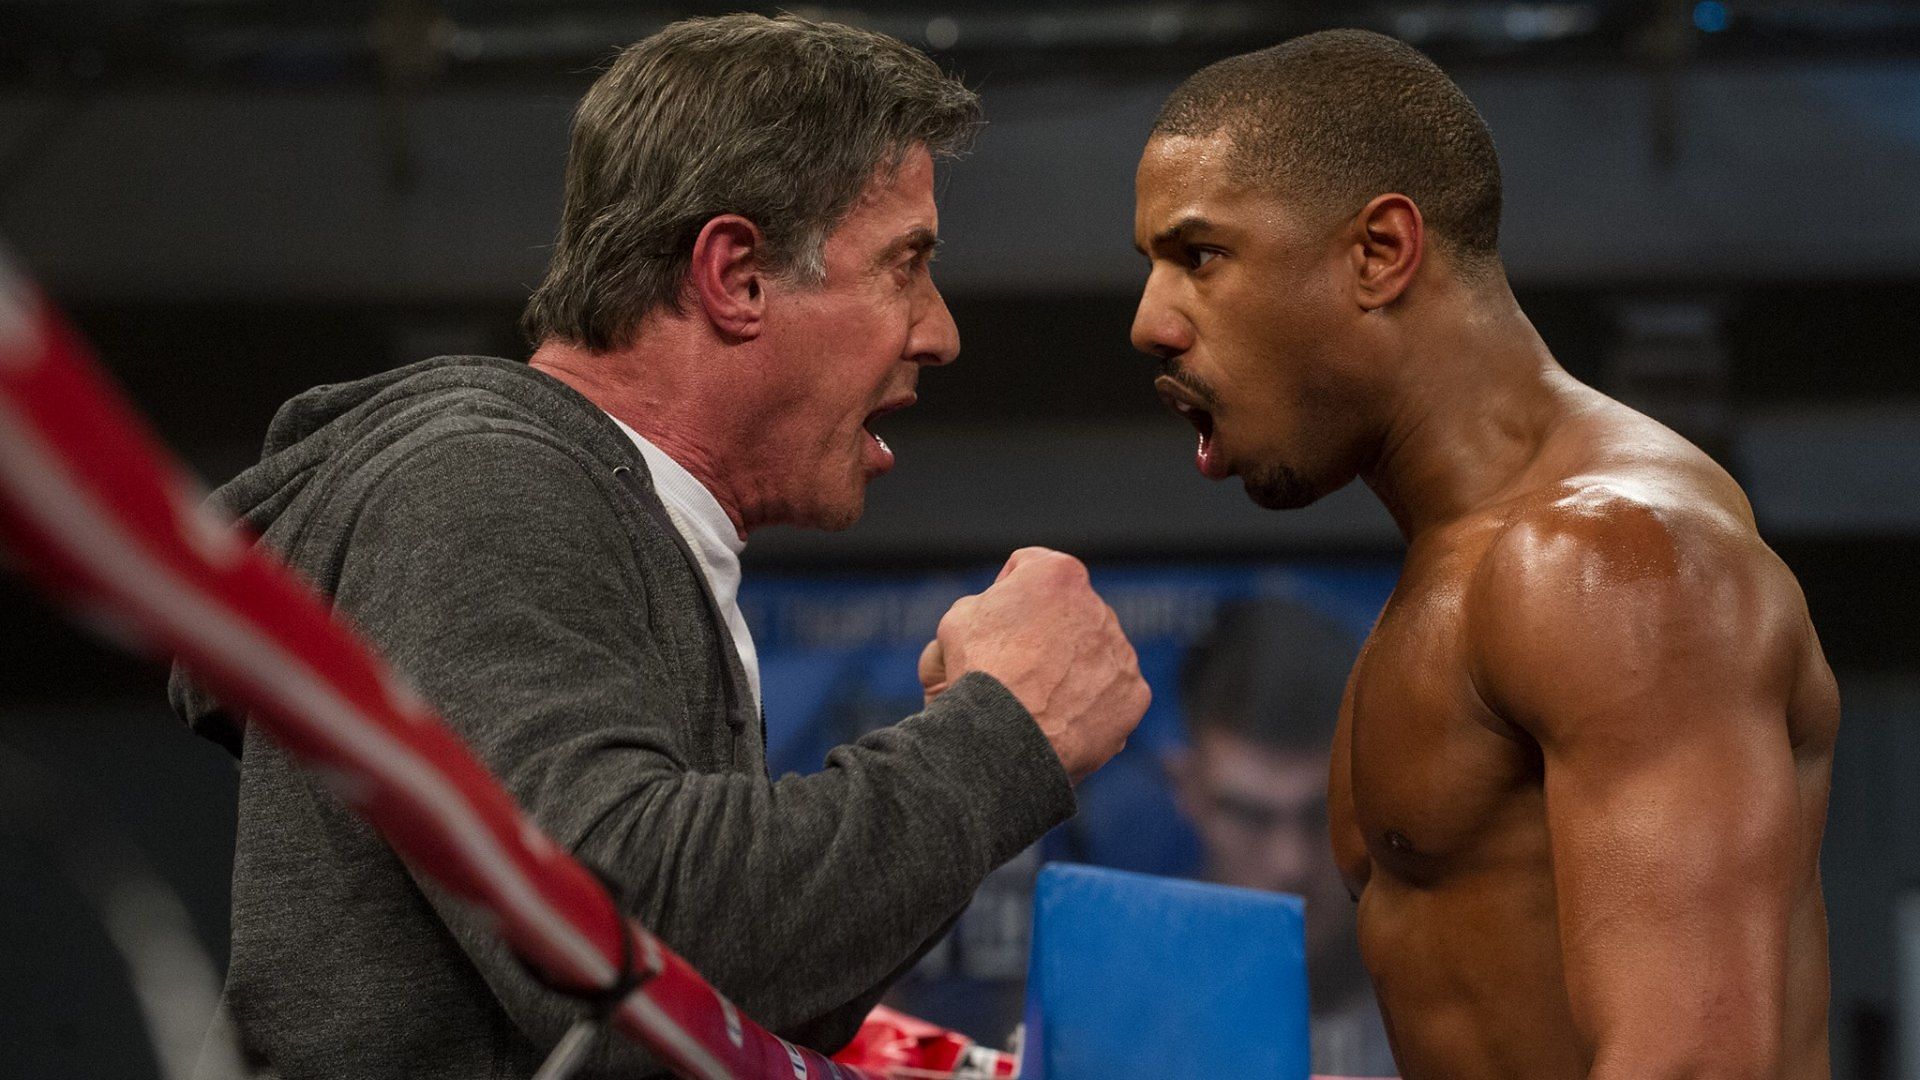 An image from the 2015 film Creed (Image via Facebook/Creed)